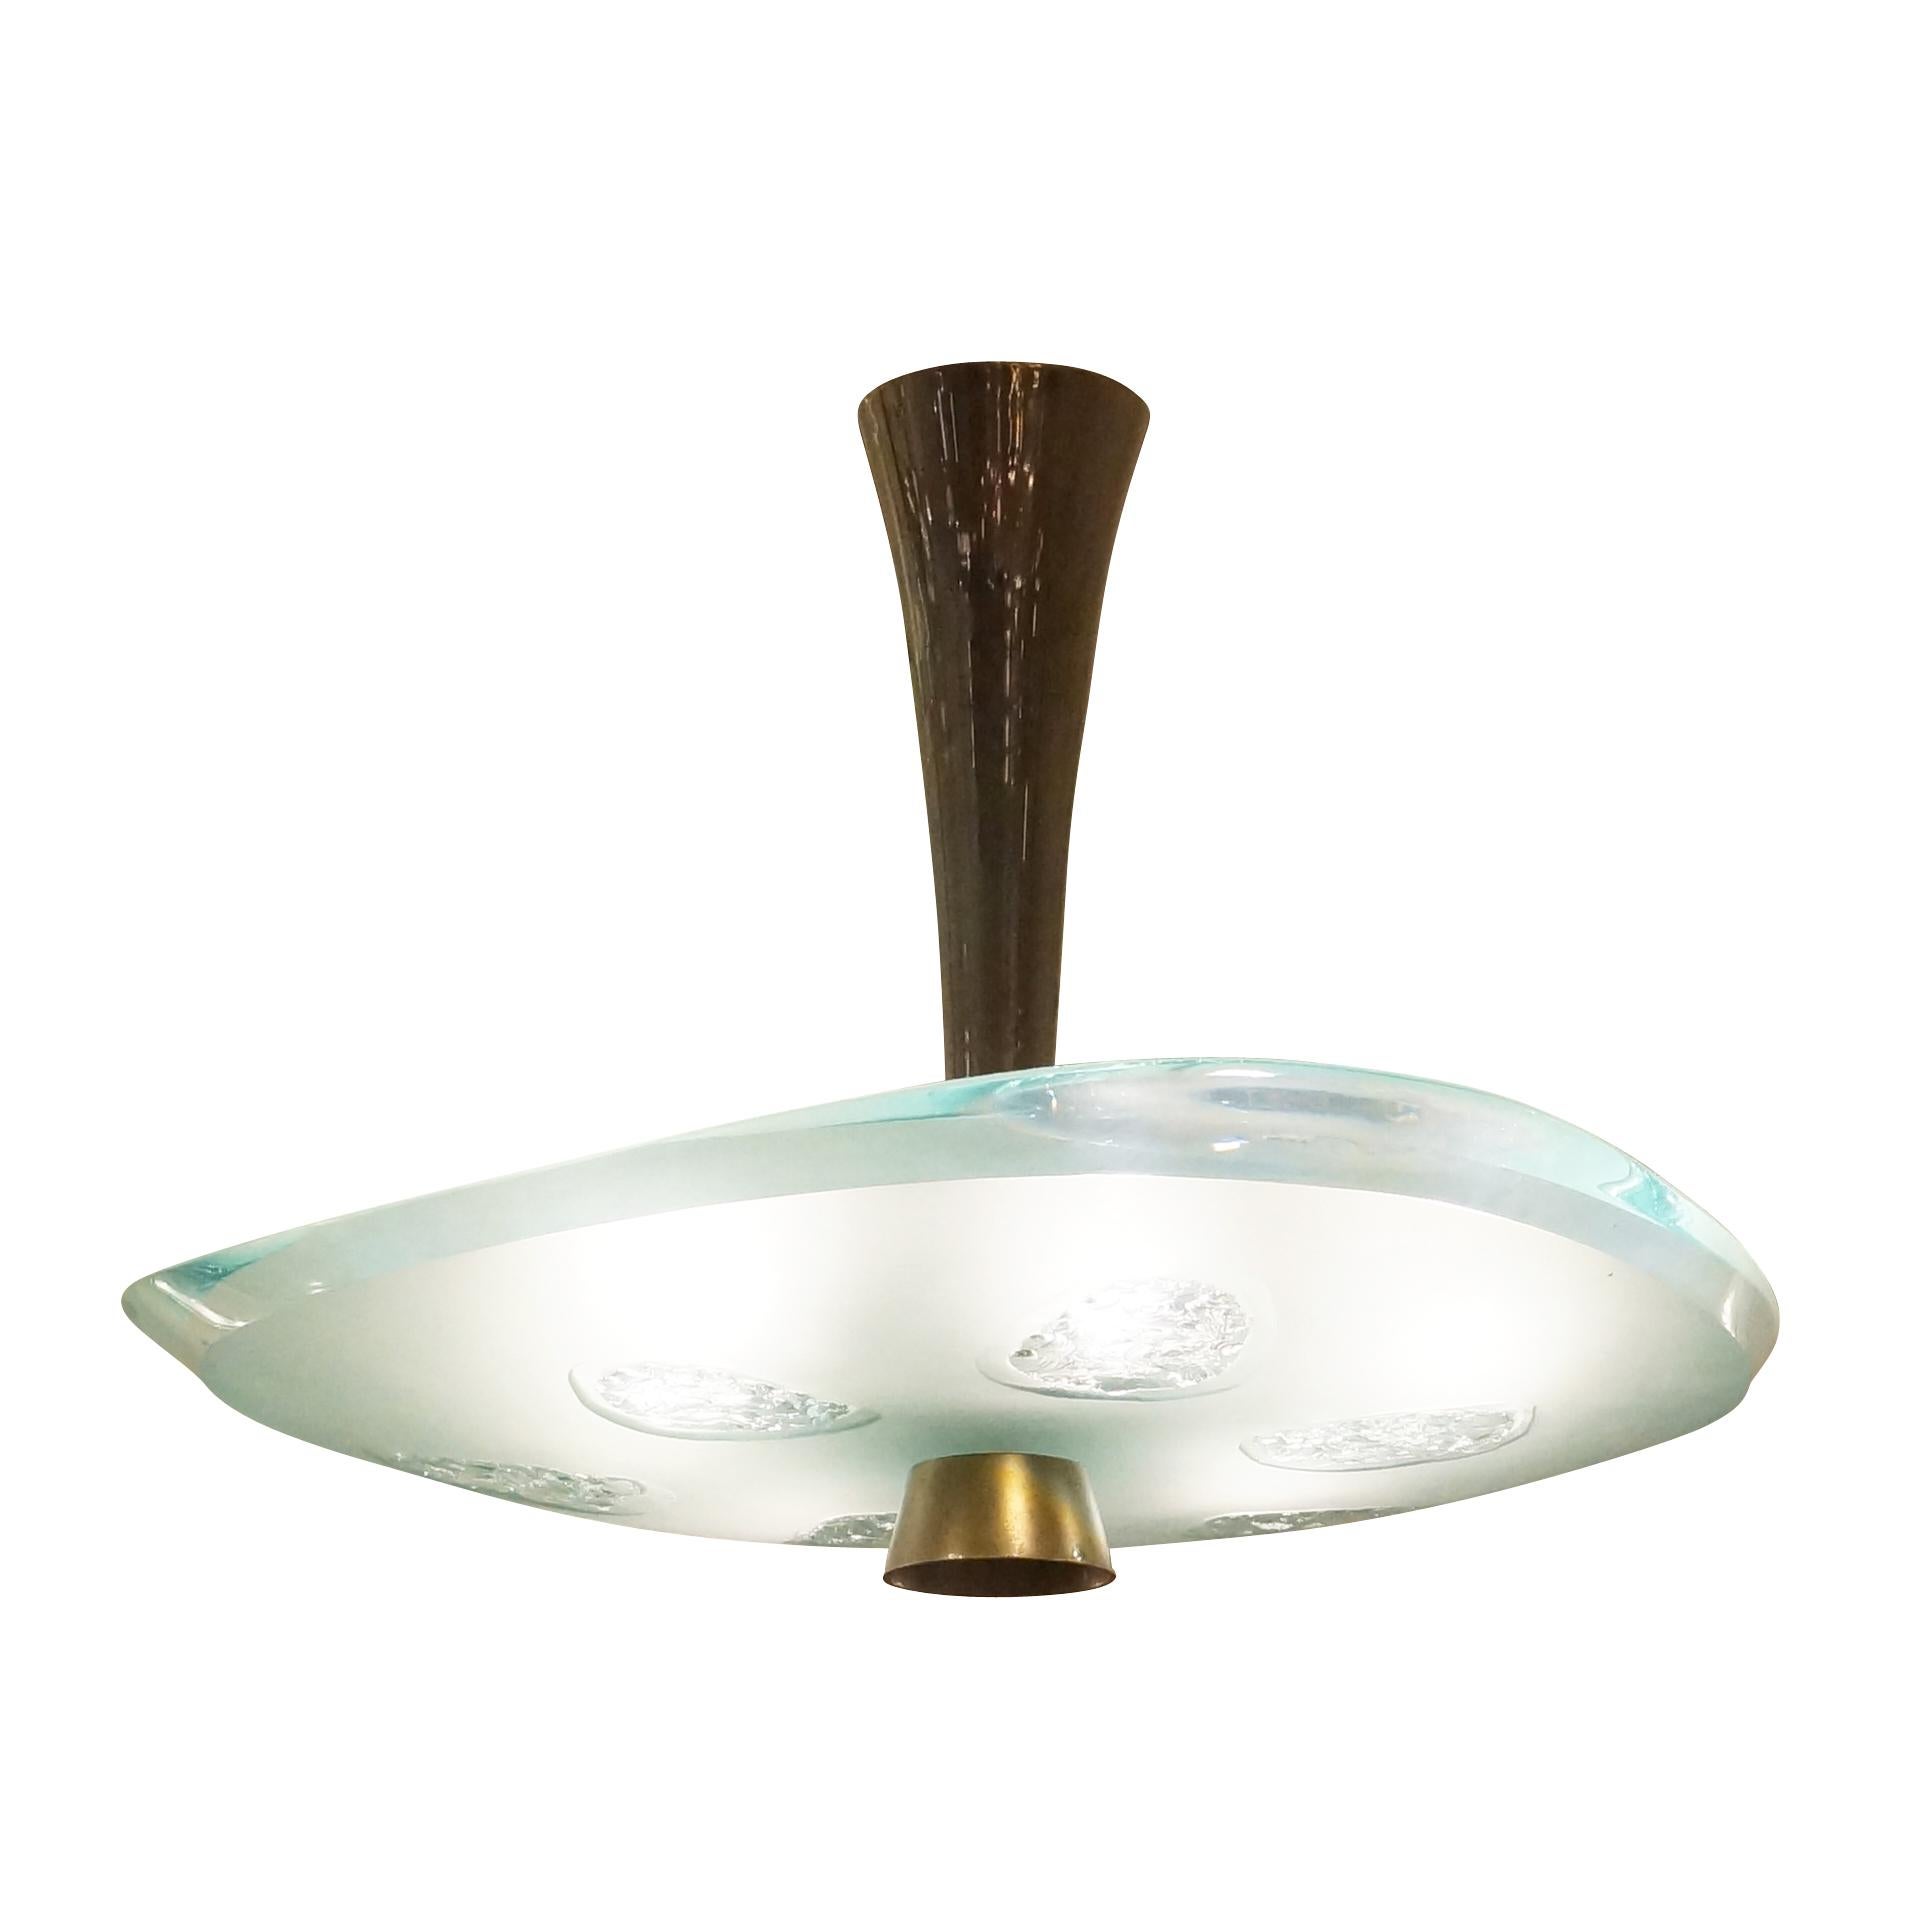 Fontana Arte ceiling light model 1748 designed by Max Ingrand in the 1950s. Features a beautiful thick glass shade with beveled edges which has been chiseled in six irregular areas. Holds six candelabra bulbs. Three available.

Condition: Excellent